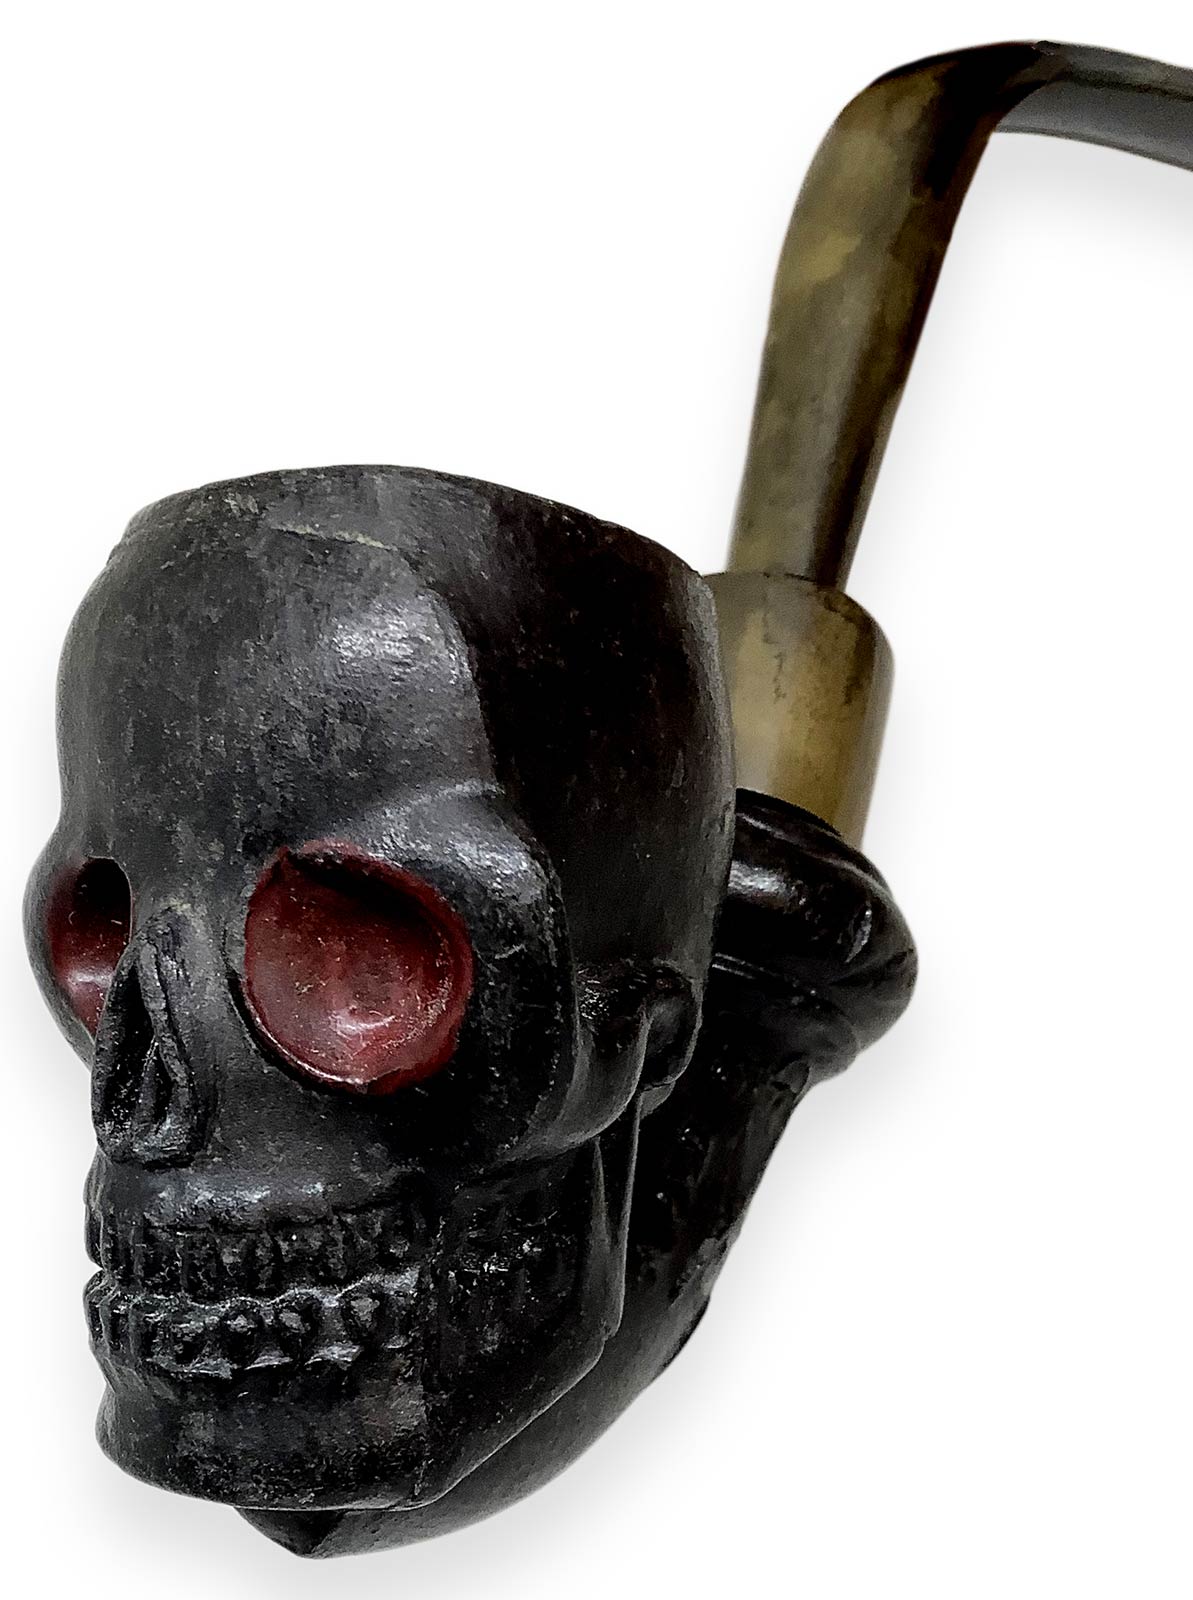 Pipe "Skull" of Gambier - Marseille, France. Early 1900s. Pipe with clay tobacco chamber and shank, - Image 6 of 6